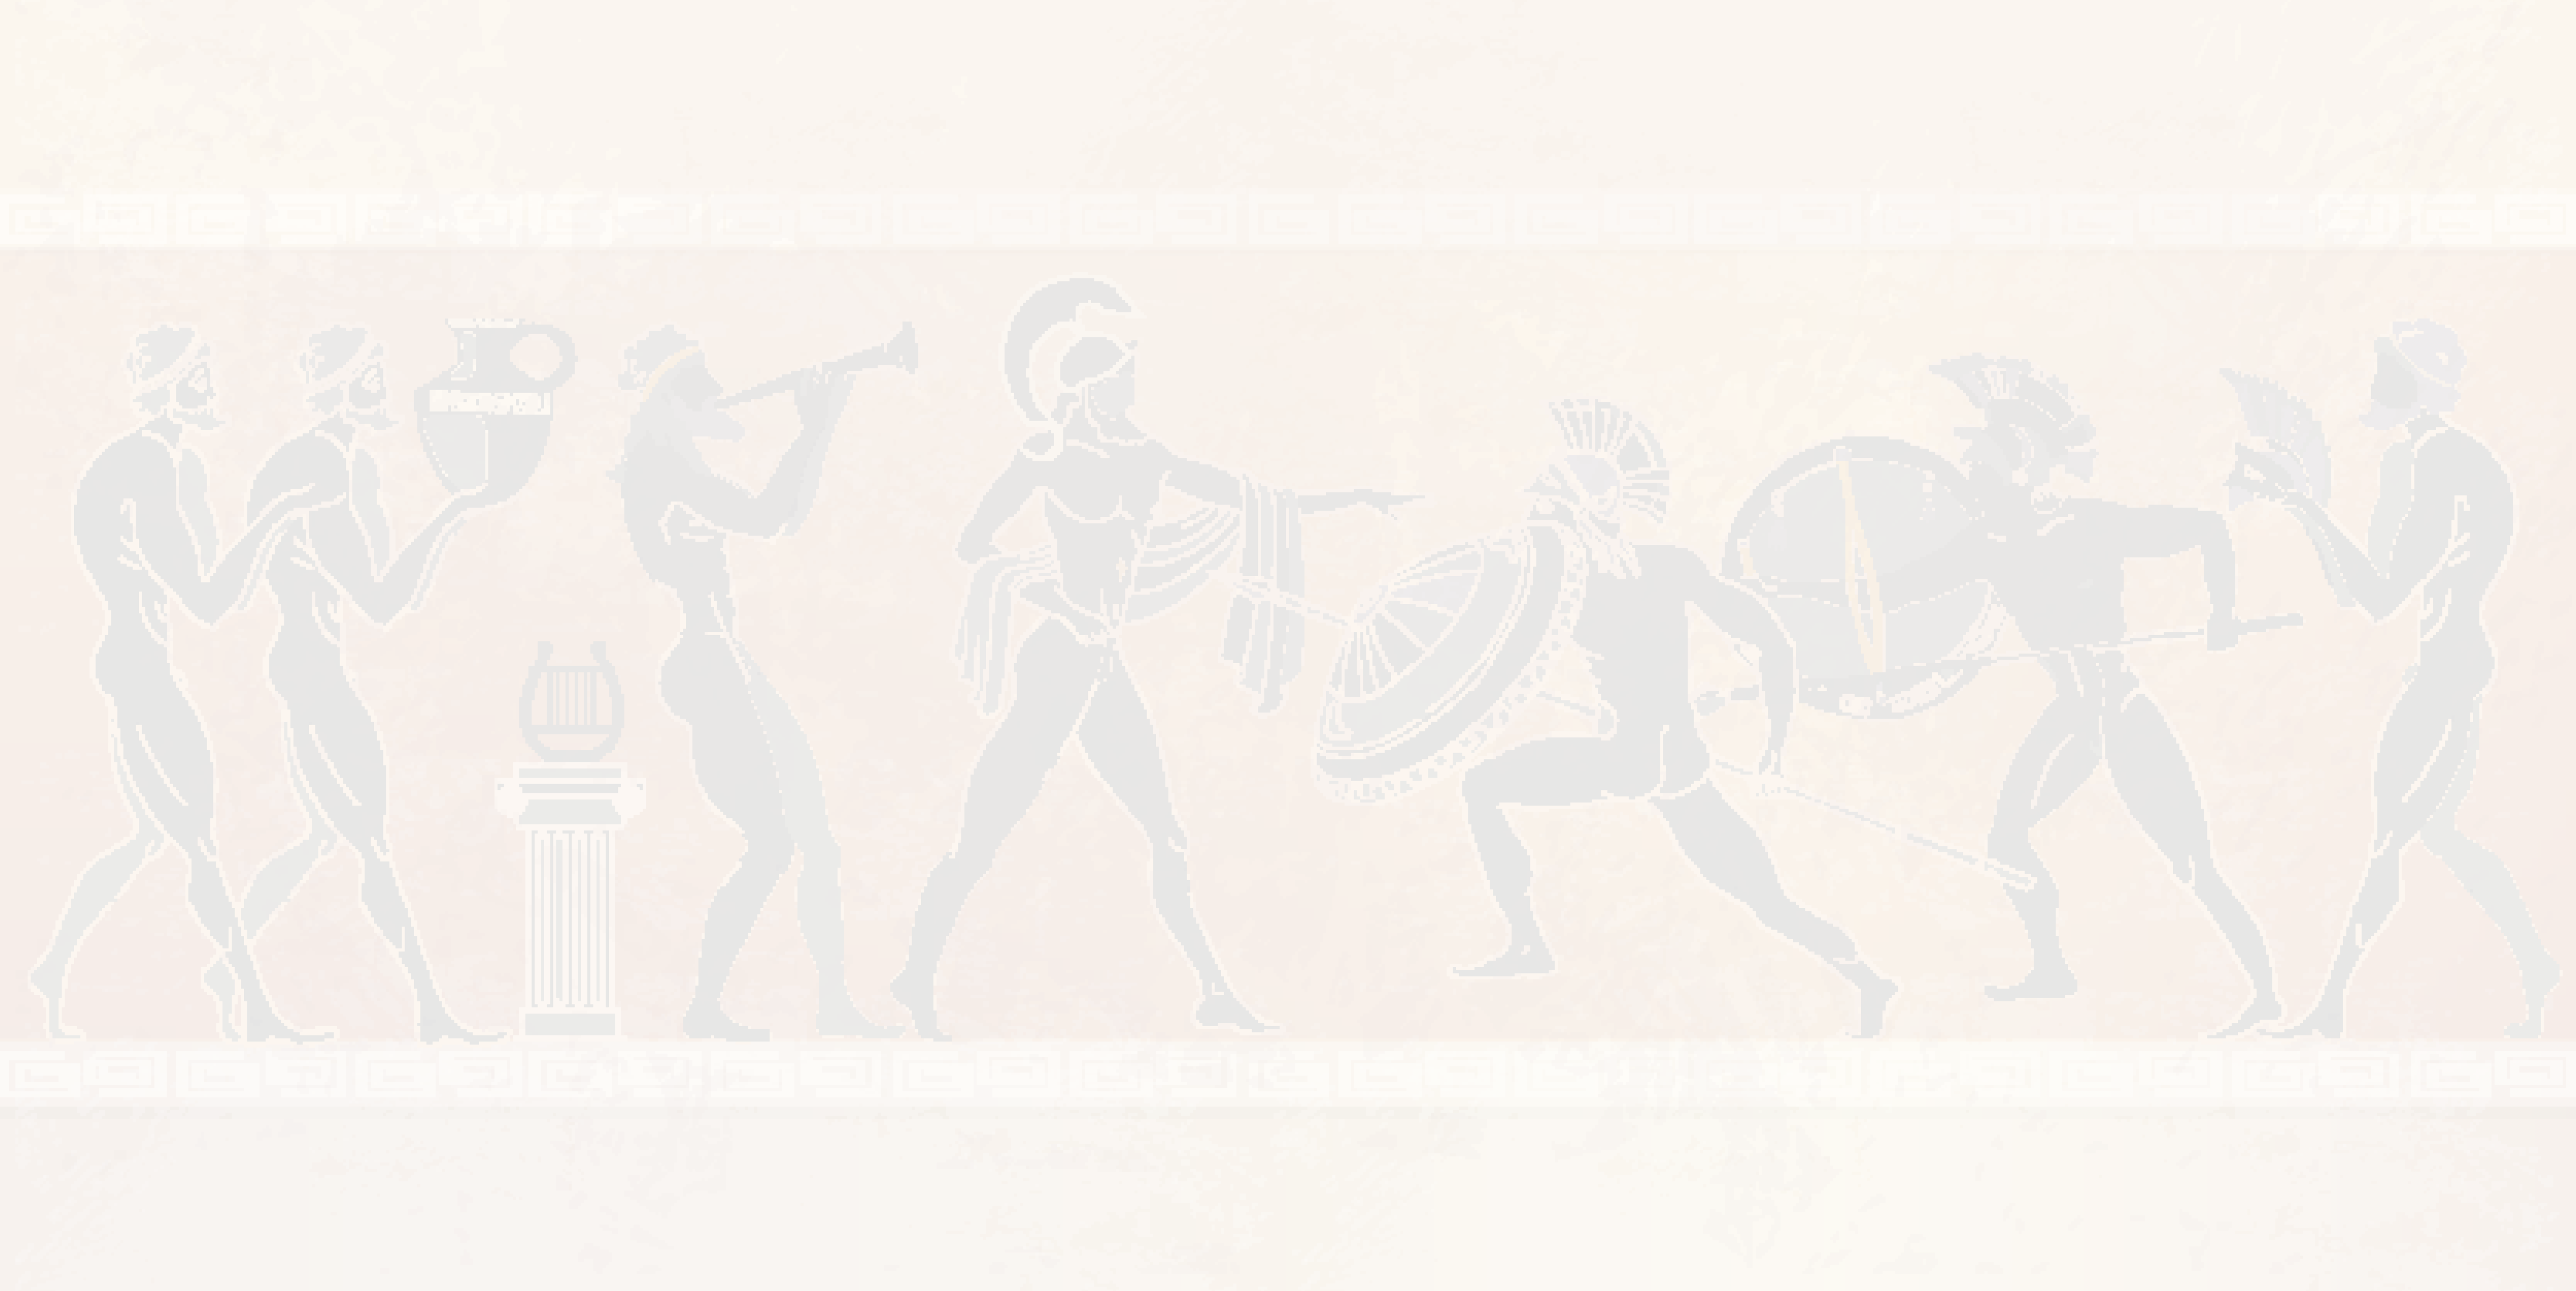 Ancient Greece scene  Black figure pottery  Ancient Greek mythology  Ancient warriors Sparta people, gods of an Olympus  Classical style